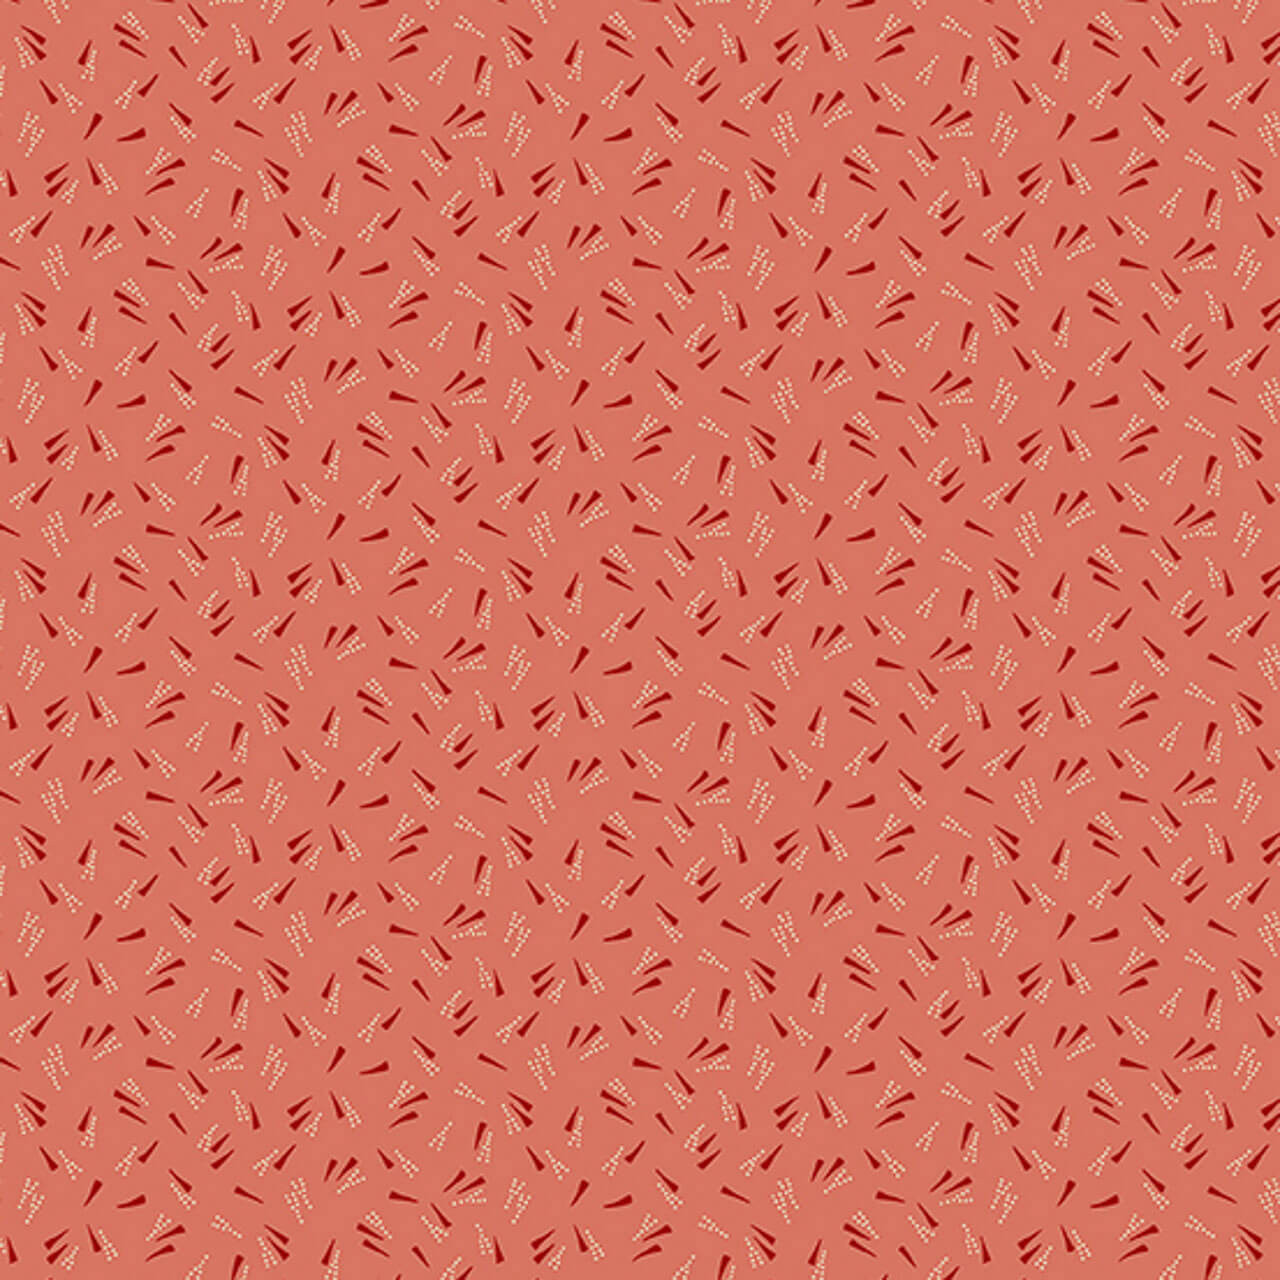 Andover's Flower Petals in Coral fabric featuring coral cotton with ditsy flower petal prints